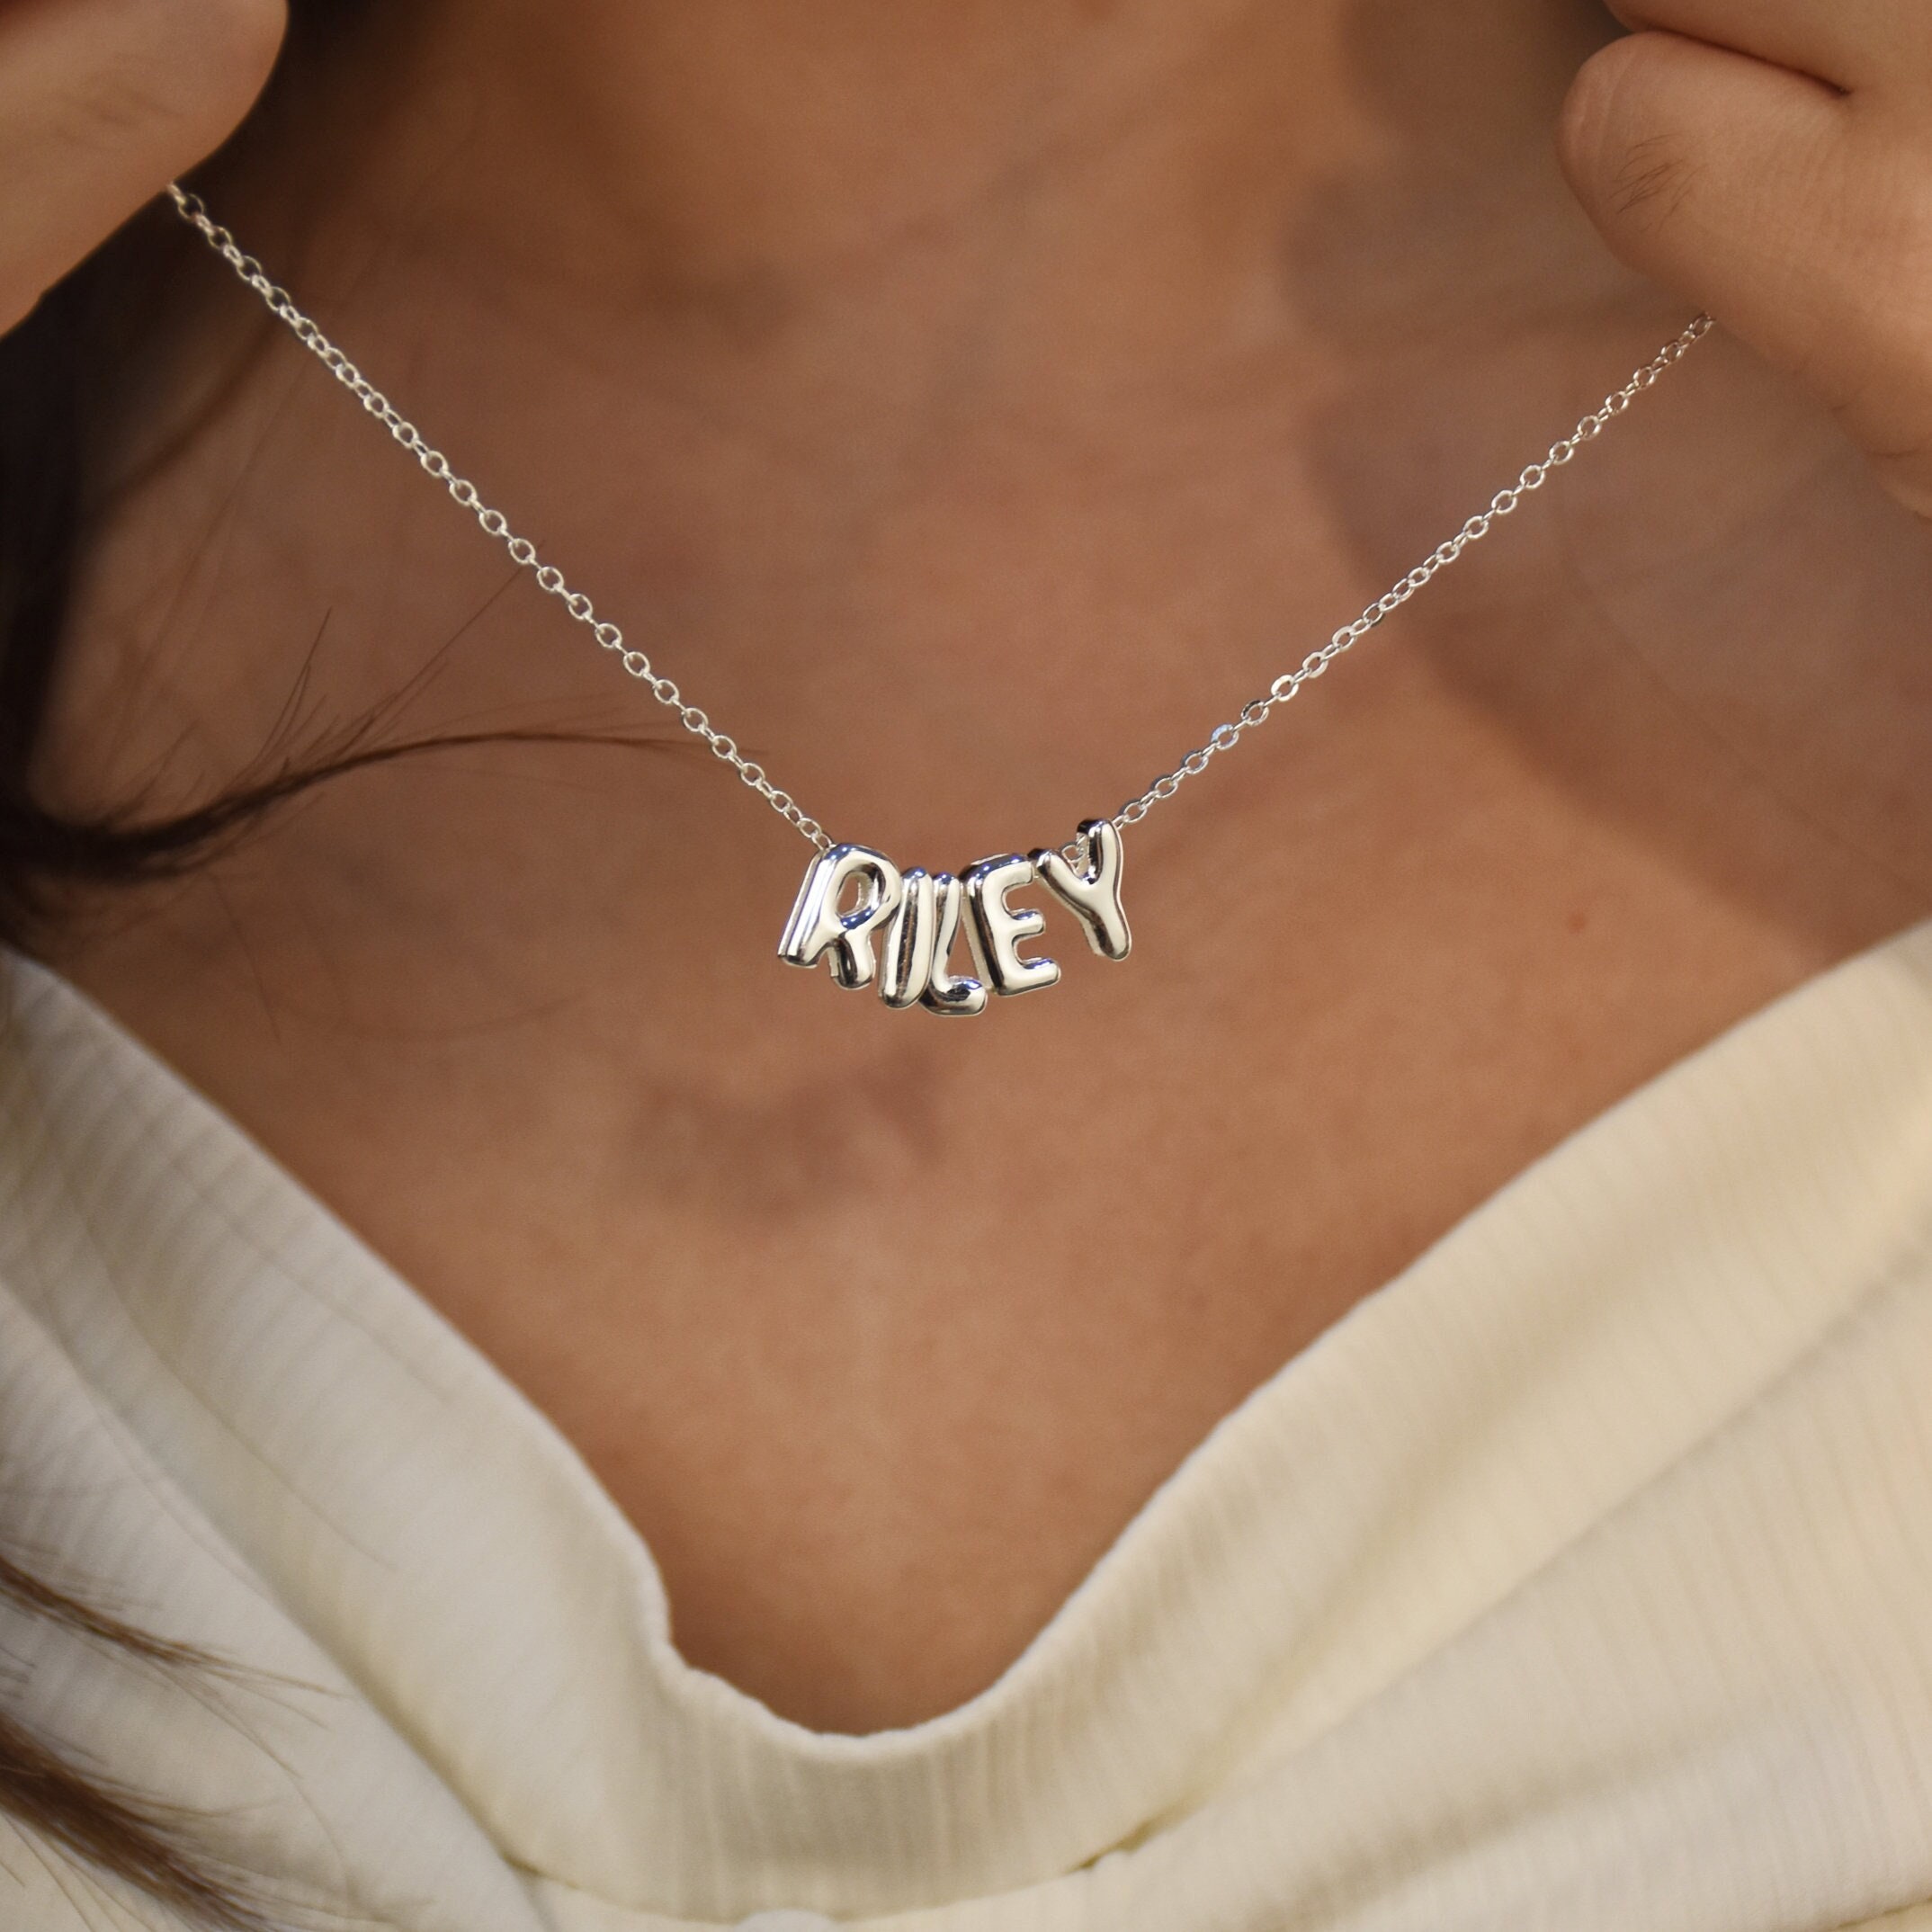 Personalized Necklace for Mom, Mother Necklace With Kids Names, Silver Mom  Necklace, Kids Name Necklace, Boy Girl Necklace, Baby Shower Gift 